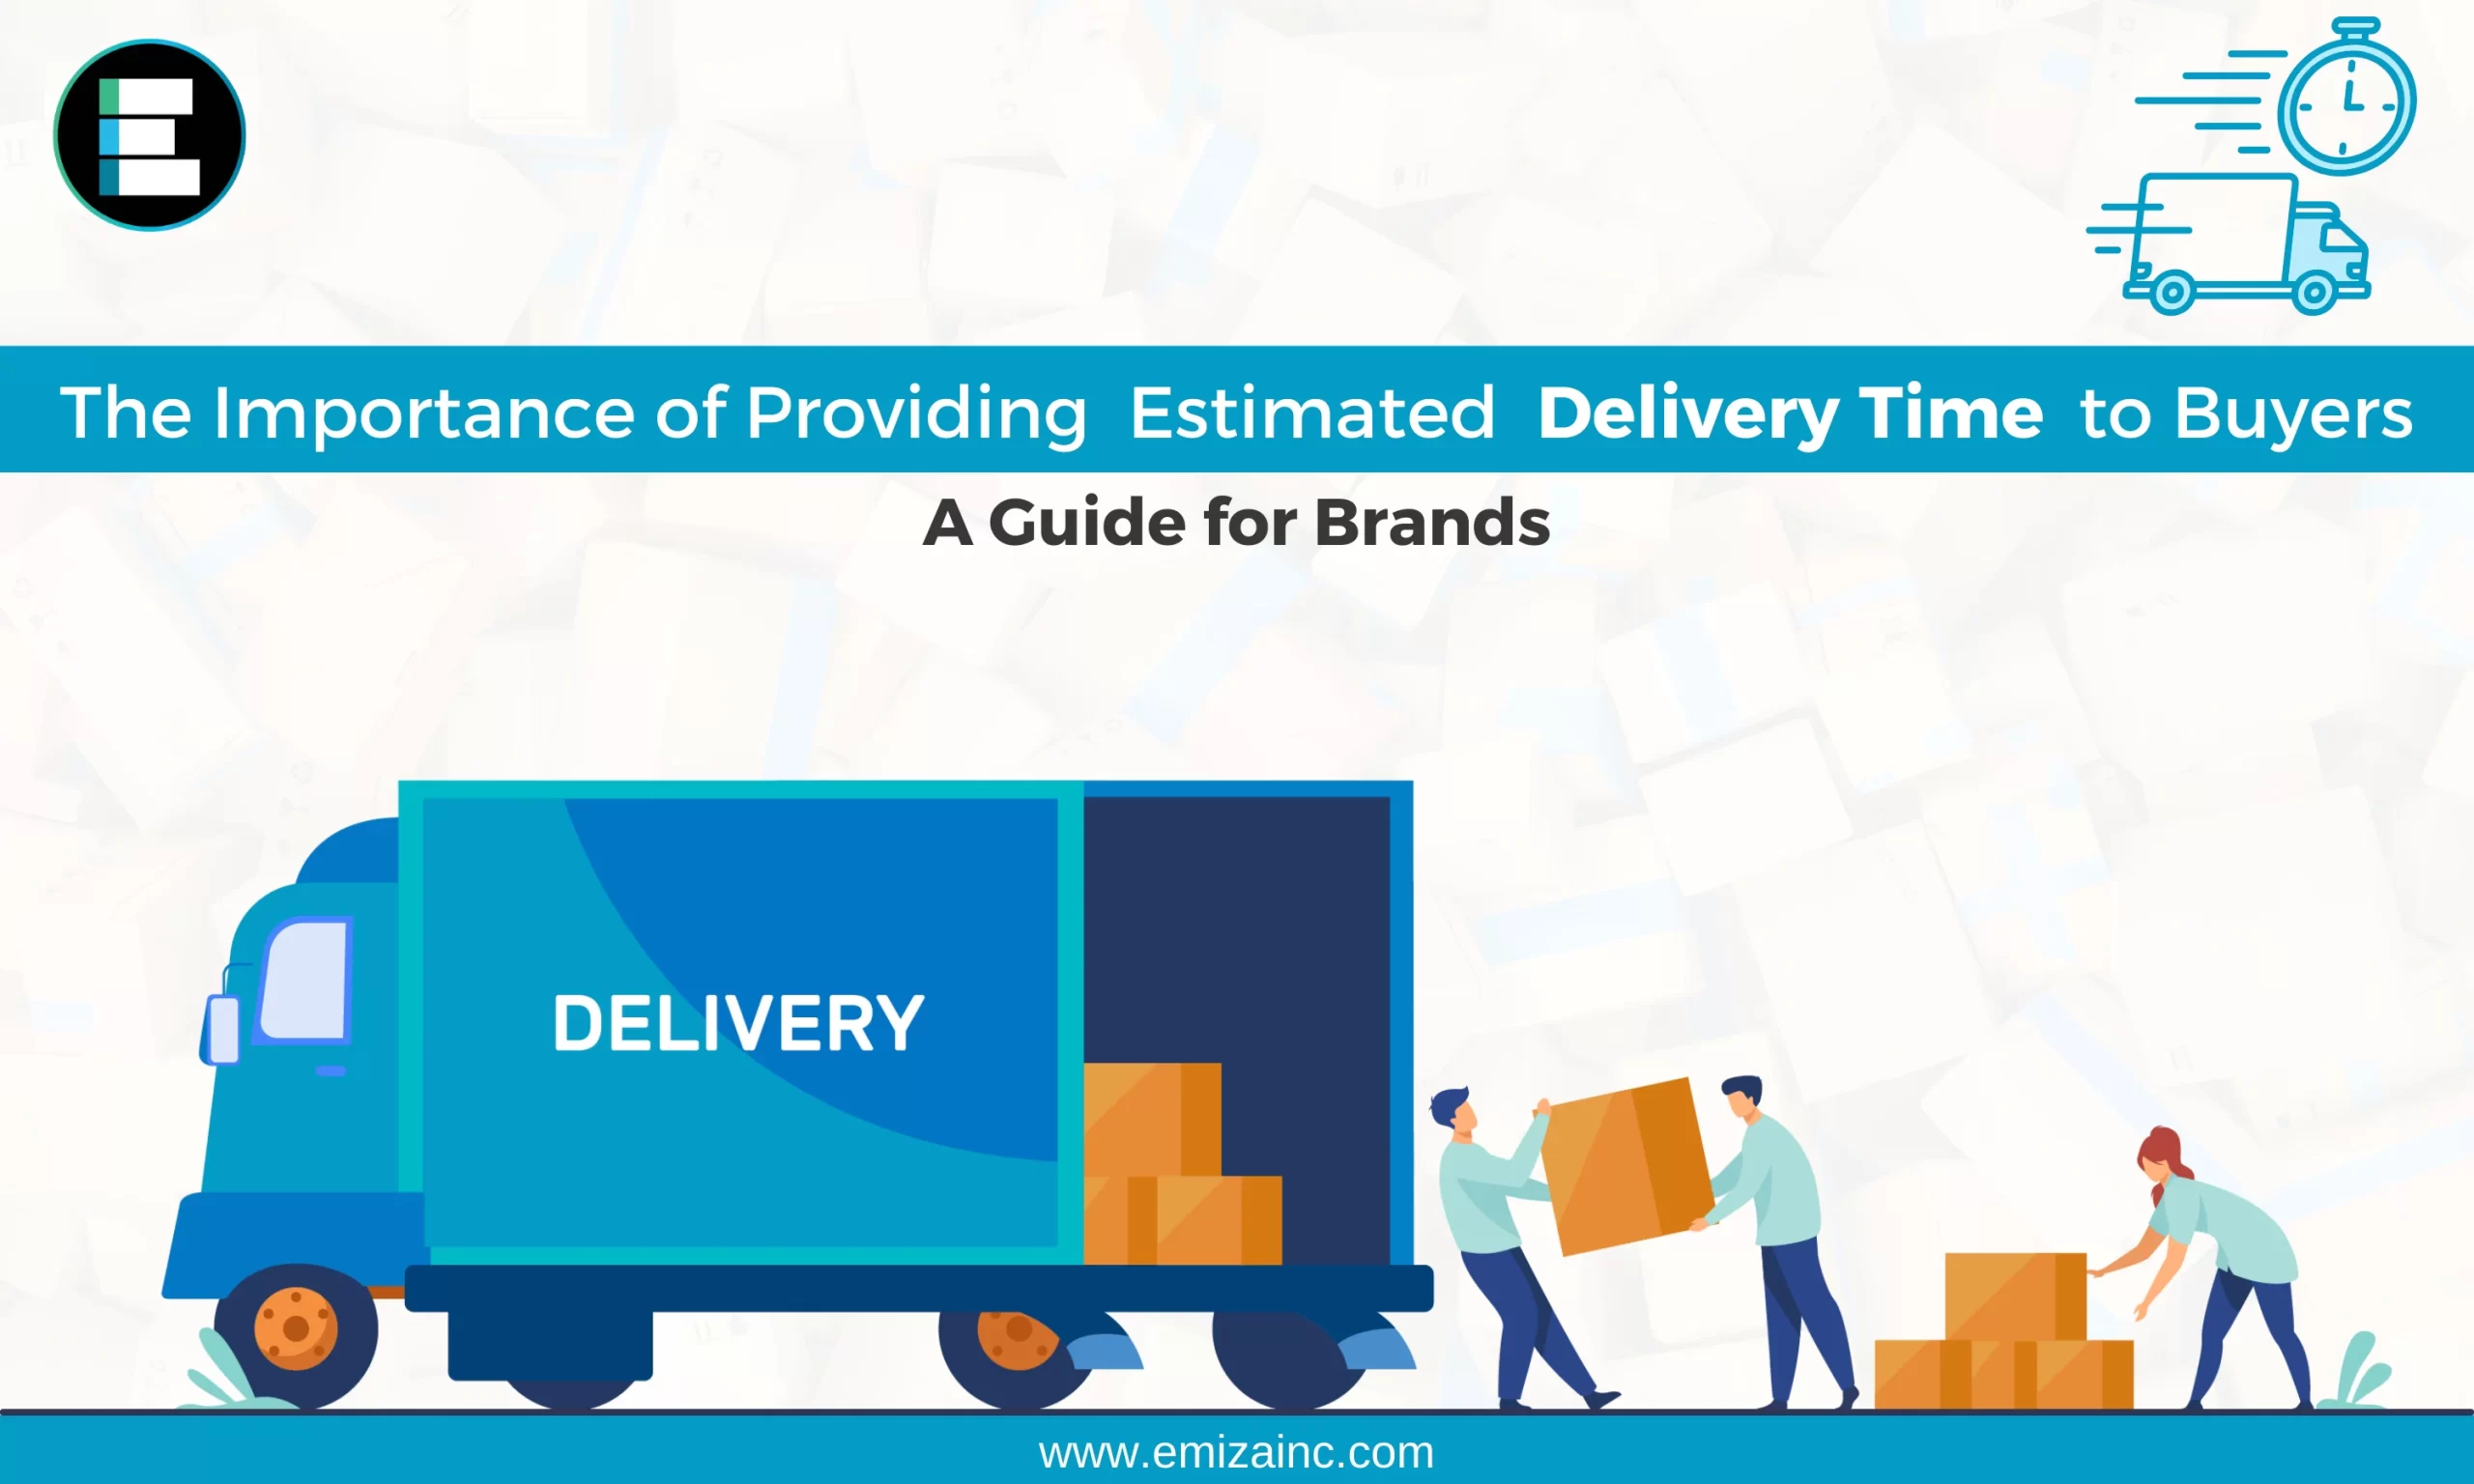 The Importance of Providing Estimated Delivery Time to Buyers: A Guide for Brands